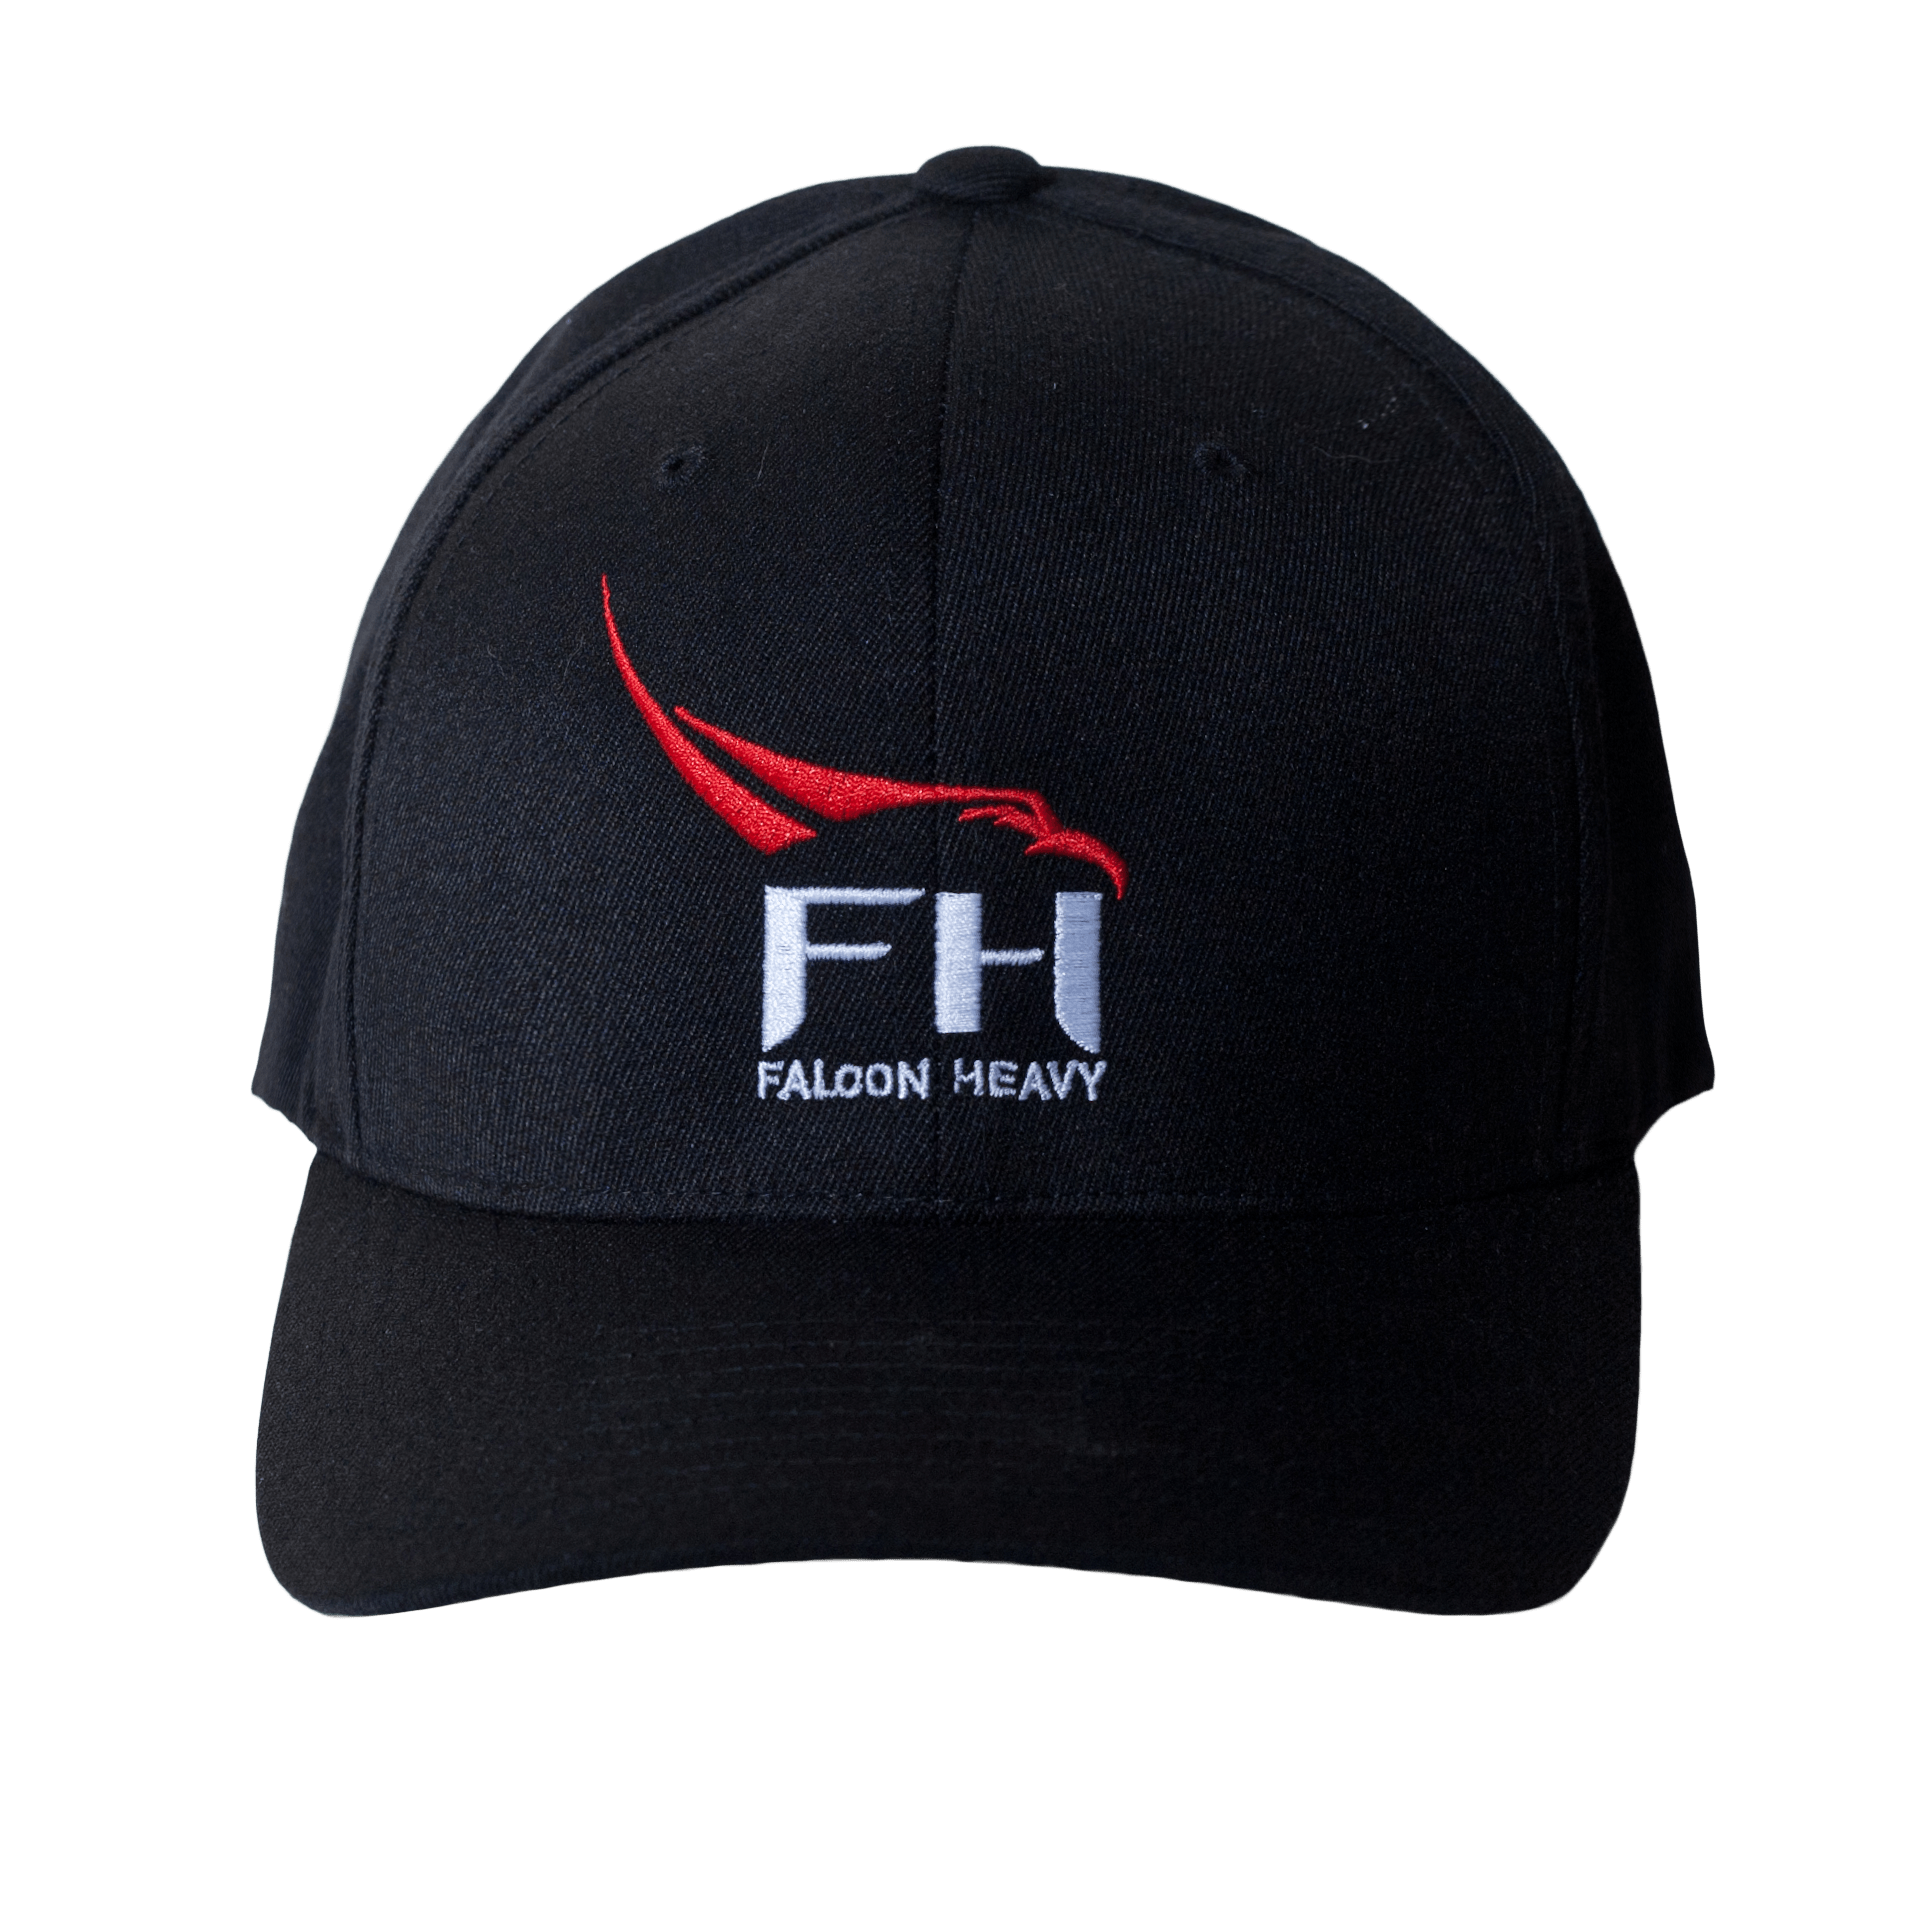 SpaceX Falcon Logo - Shop SPACEX FALCON HEAVY FLEXFIT CAP Online from The Space Store